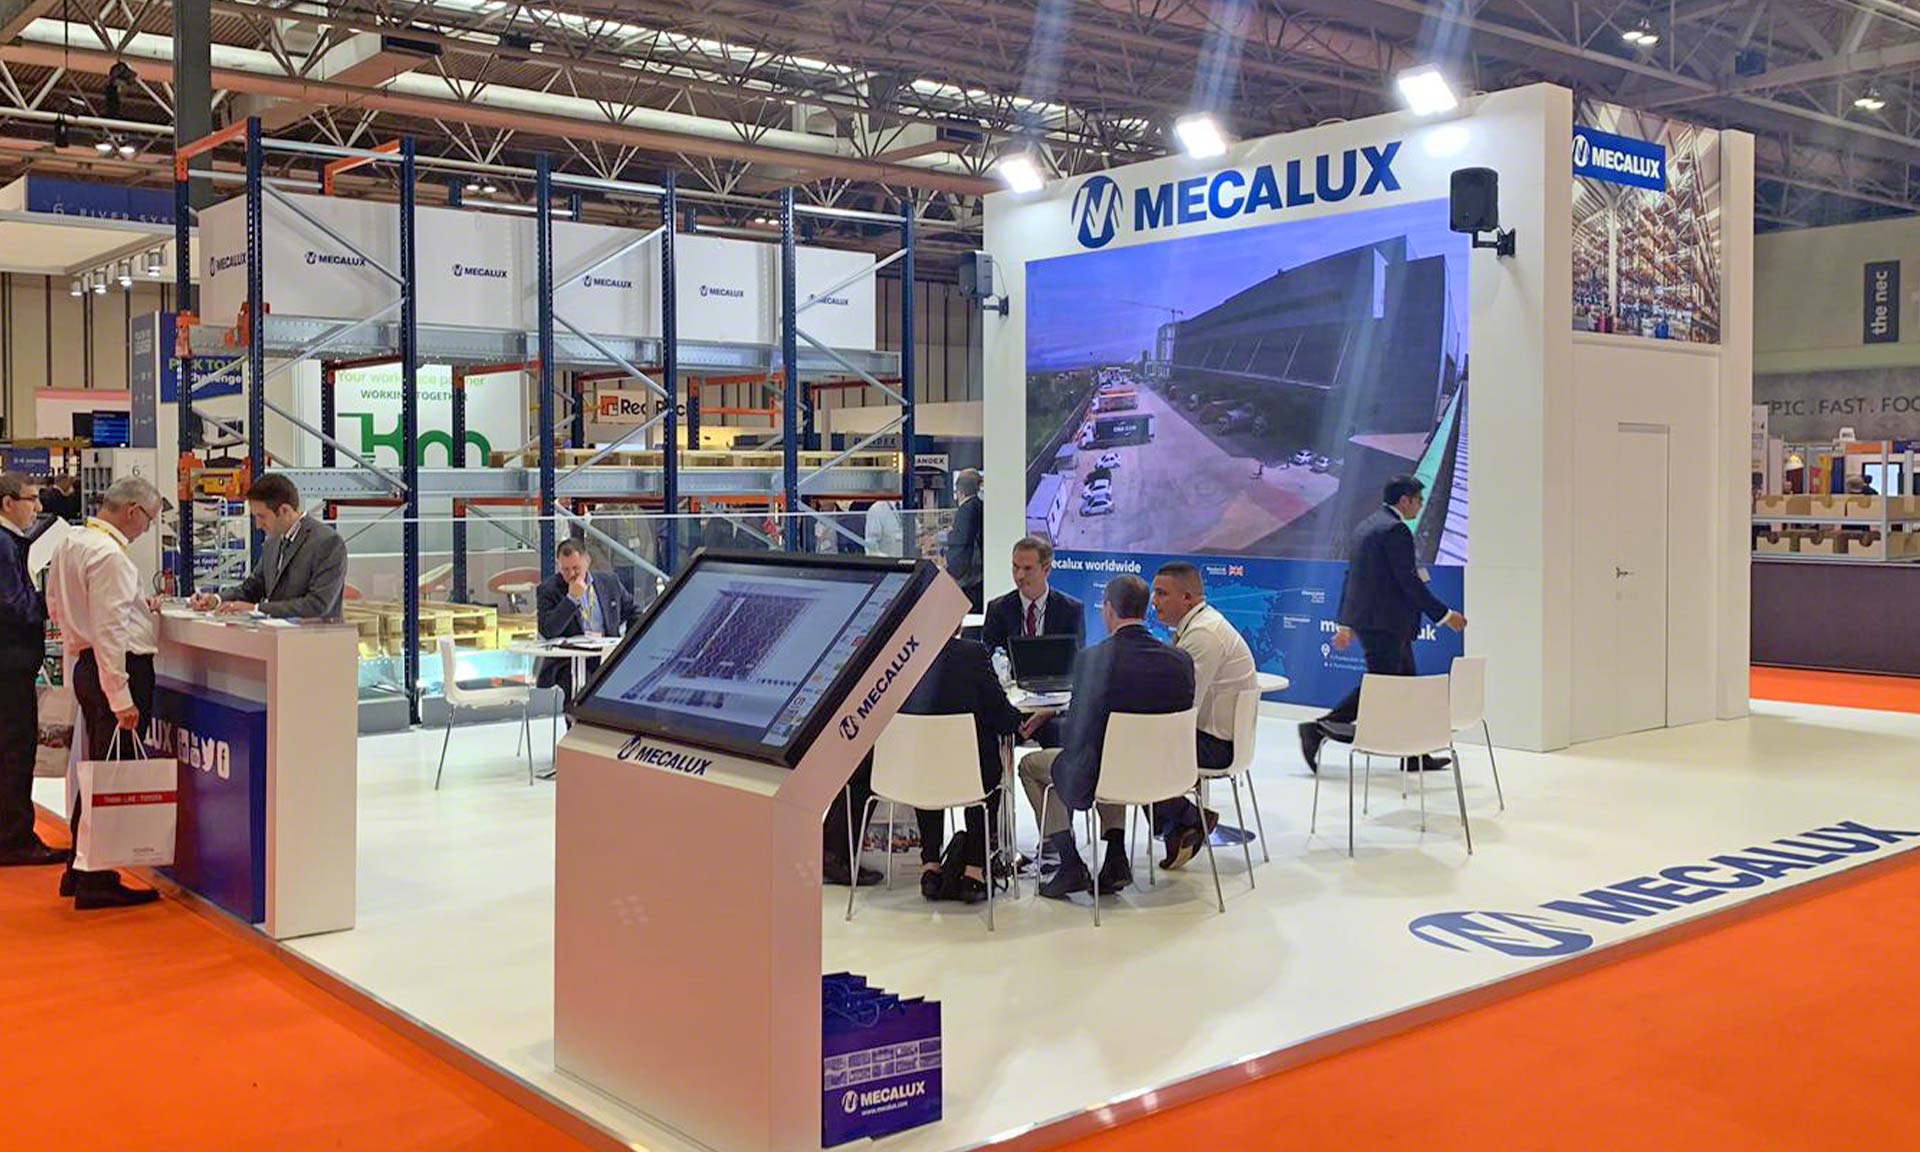 Mecalux exhibits its latest innovations at the IMHX 2022 fair